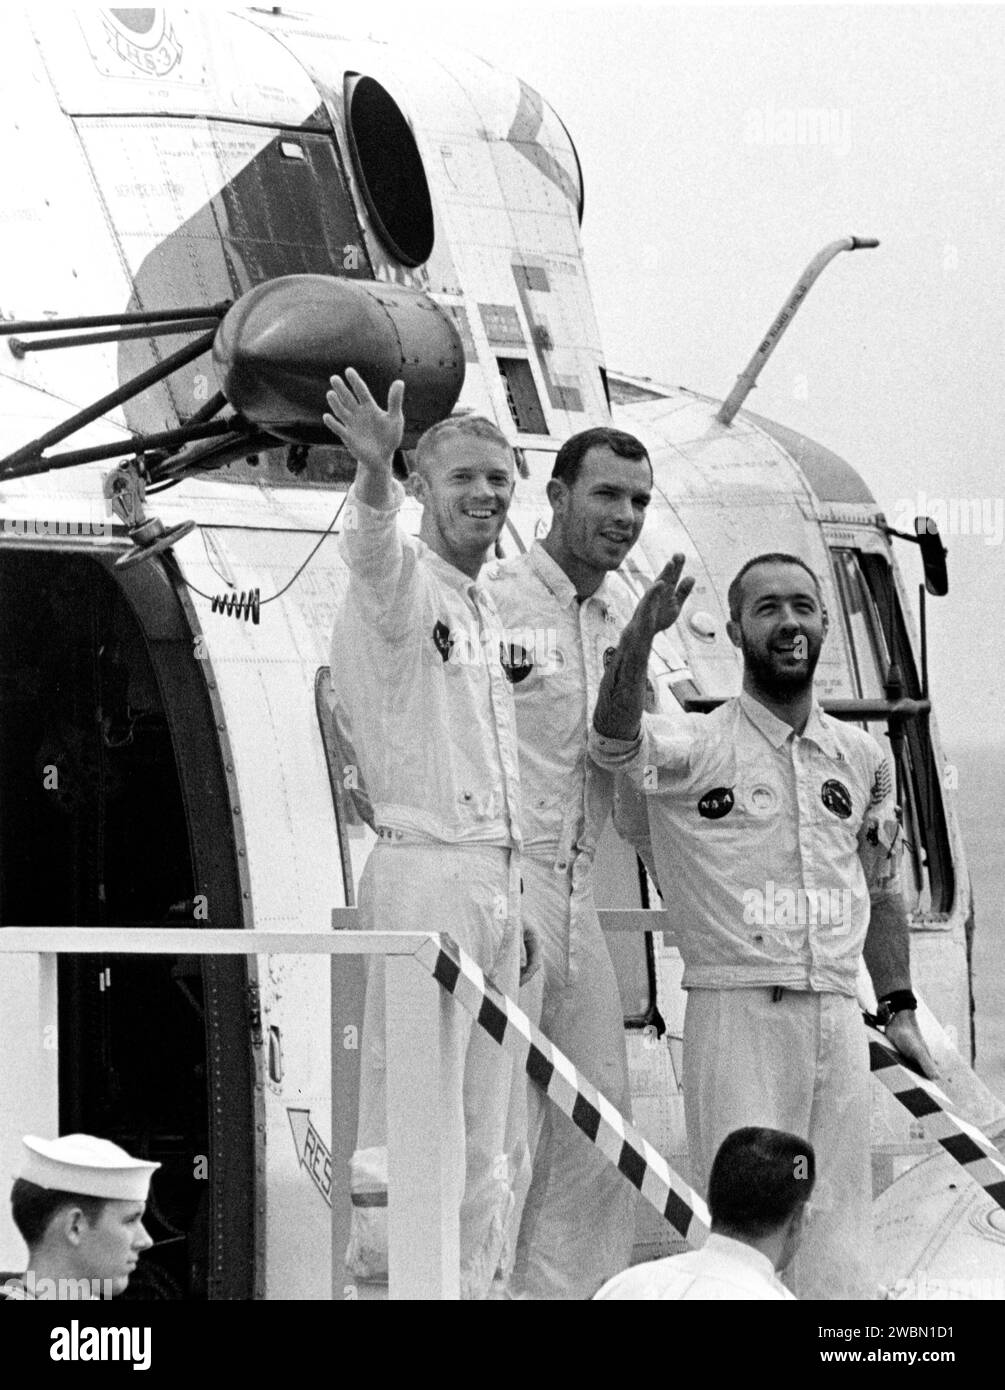 KENNEDY SPACE CENTER, FLA. -- One hour after their Apollo 9 spacecraft splashed down today in the Atlantic Ocean, waving astronauts, left to right, Russell L. Schweickart, David R. Scott and James A. McDivitt, descend stairway on to main deck of the USS Guadalcanal, prime recovery ship. The helicopter flew them from their impact point a short distance to the ship, originally positioned less than five miles from where they splashed down. The 10-day Earth orbital mission proved the feasibility of the lunar module for manned descent to the Moon's surface, scheduled to take place later this year. Stock Photo